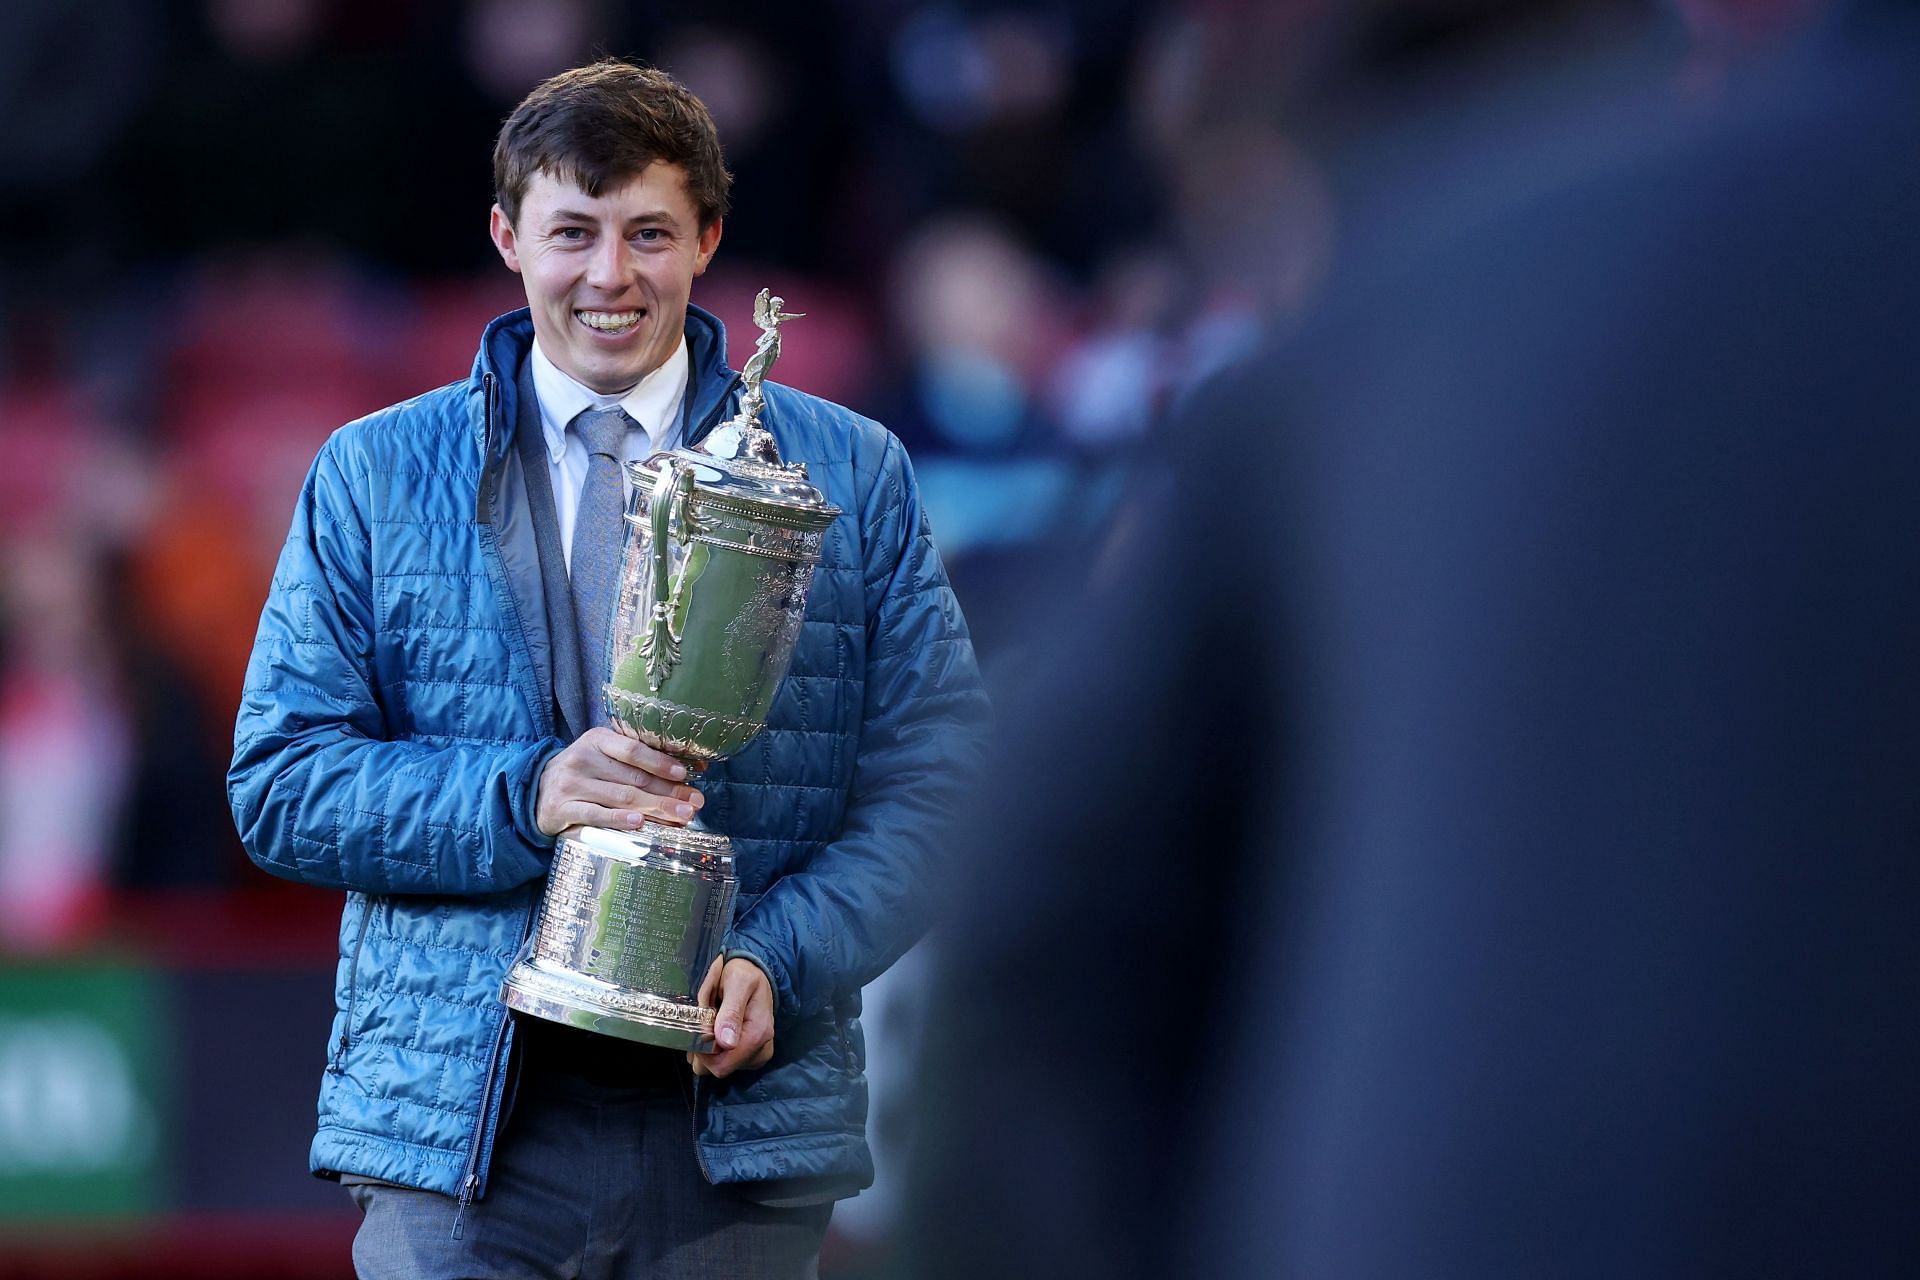 Matthew Fitzpatrick with the trophy prior to the Sky Bet Championship between Sheffield United and Coventry City (Image via Getty)